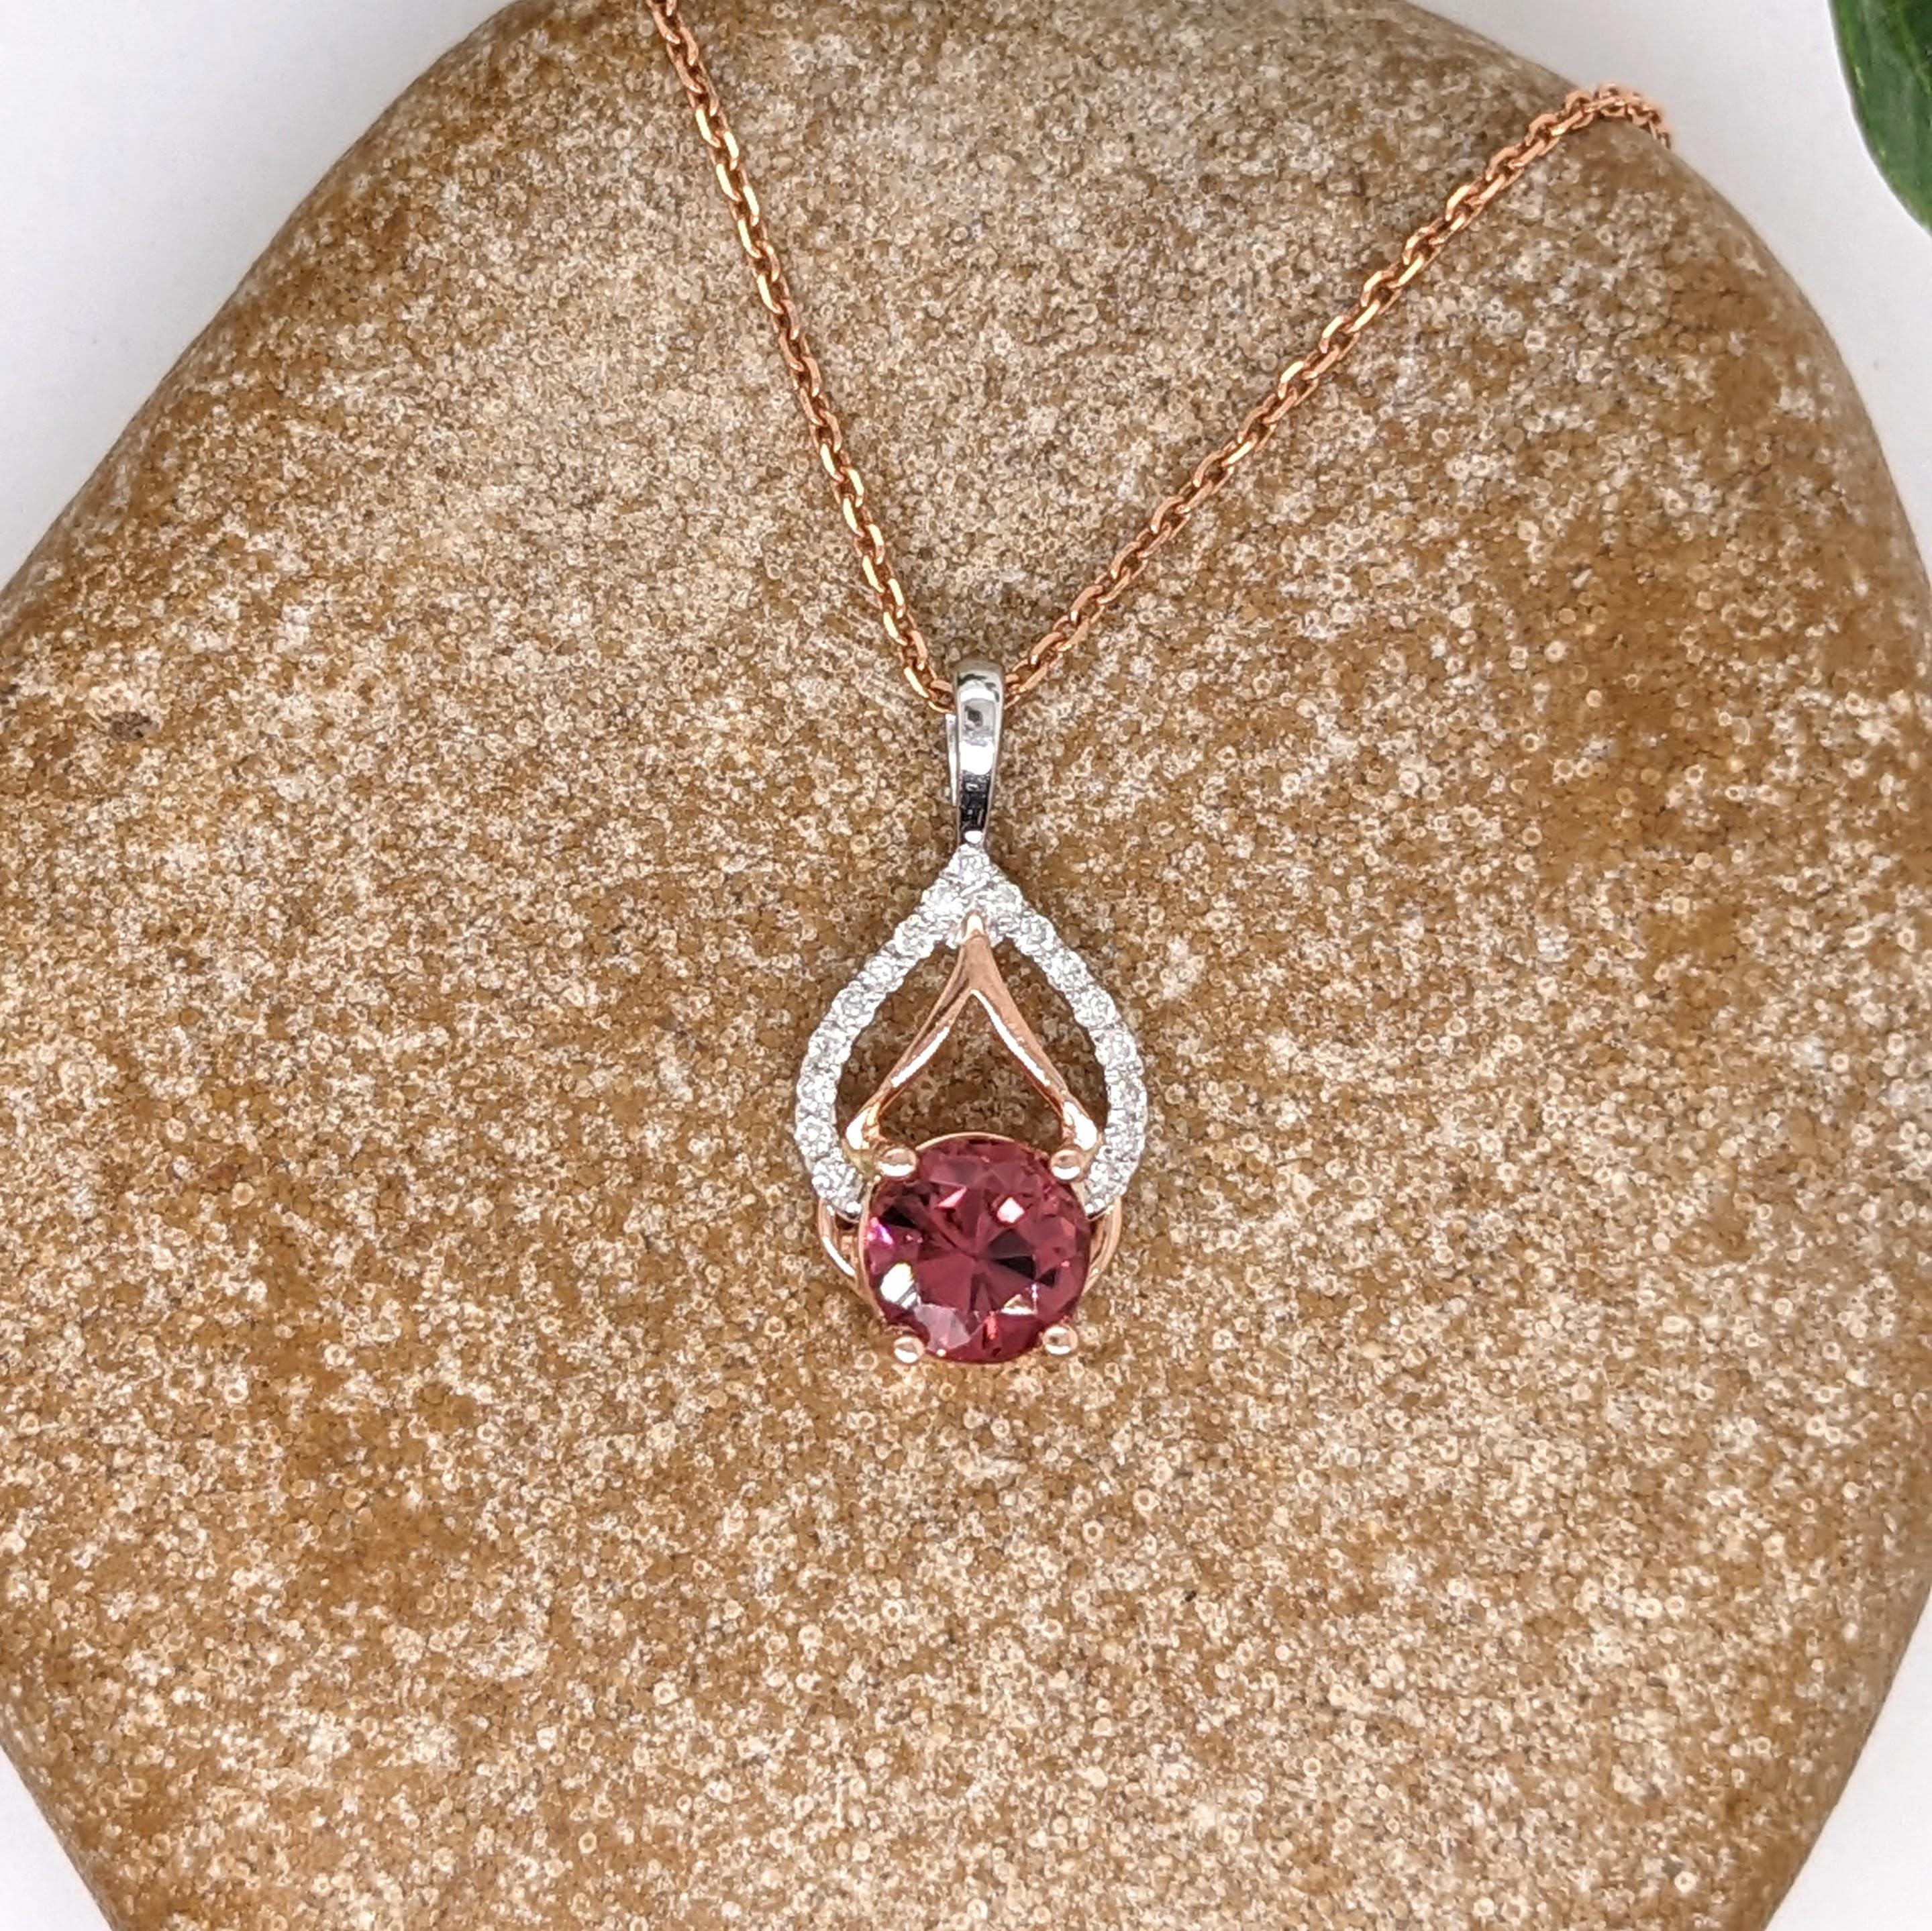 This beautiful pendant features a 0.79ct round pink tourmaline with natural earth-mined diamonds in solid 14k dual tone gold. A fresh and unique design to add to your collection and for everyday wear! 

Specifications

Item Type: Pendant
Center